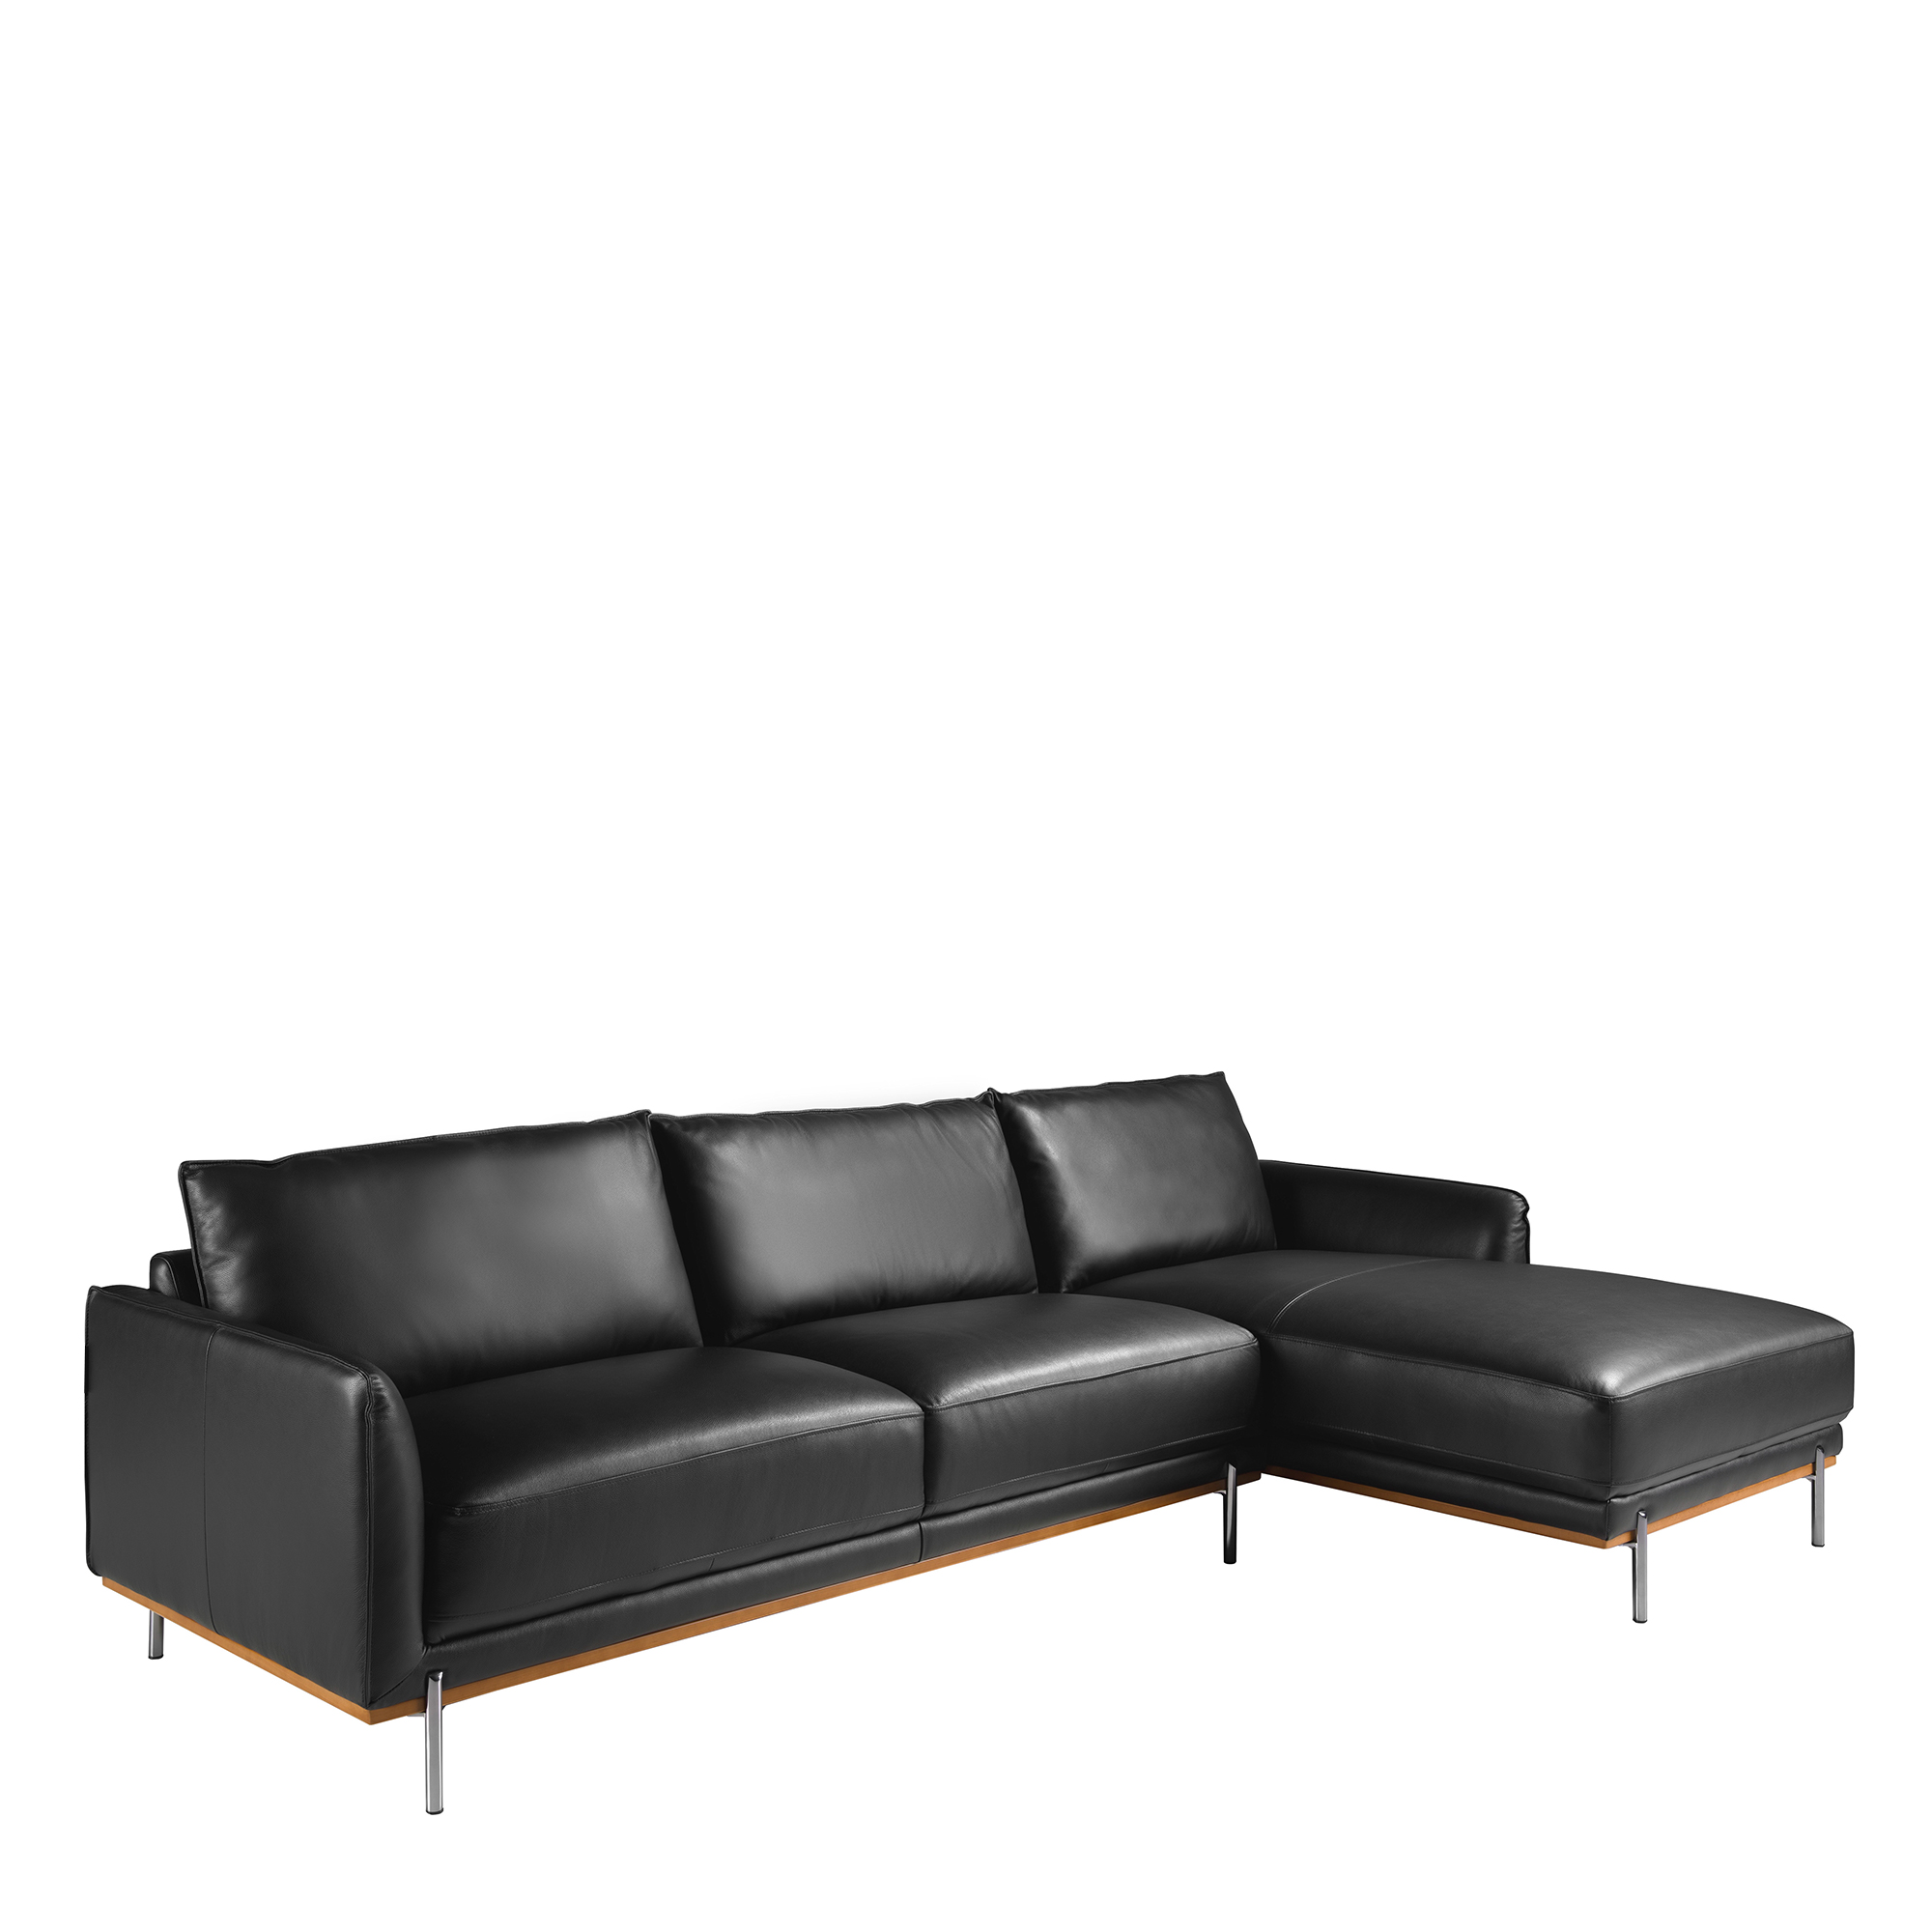 Right chaise longue sofa black leather